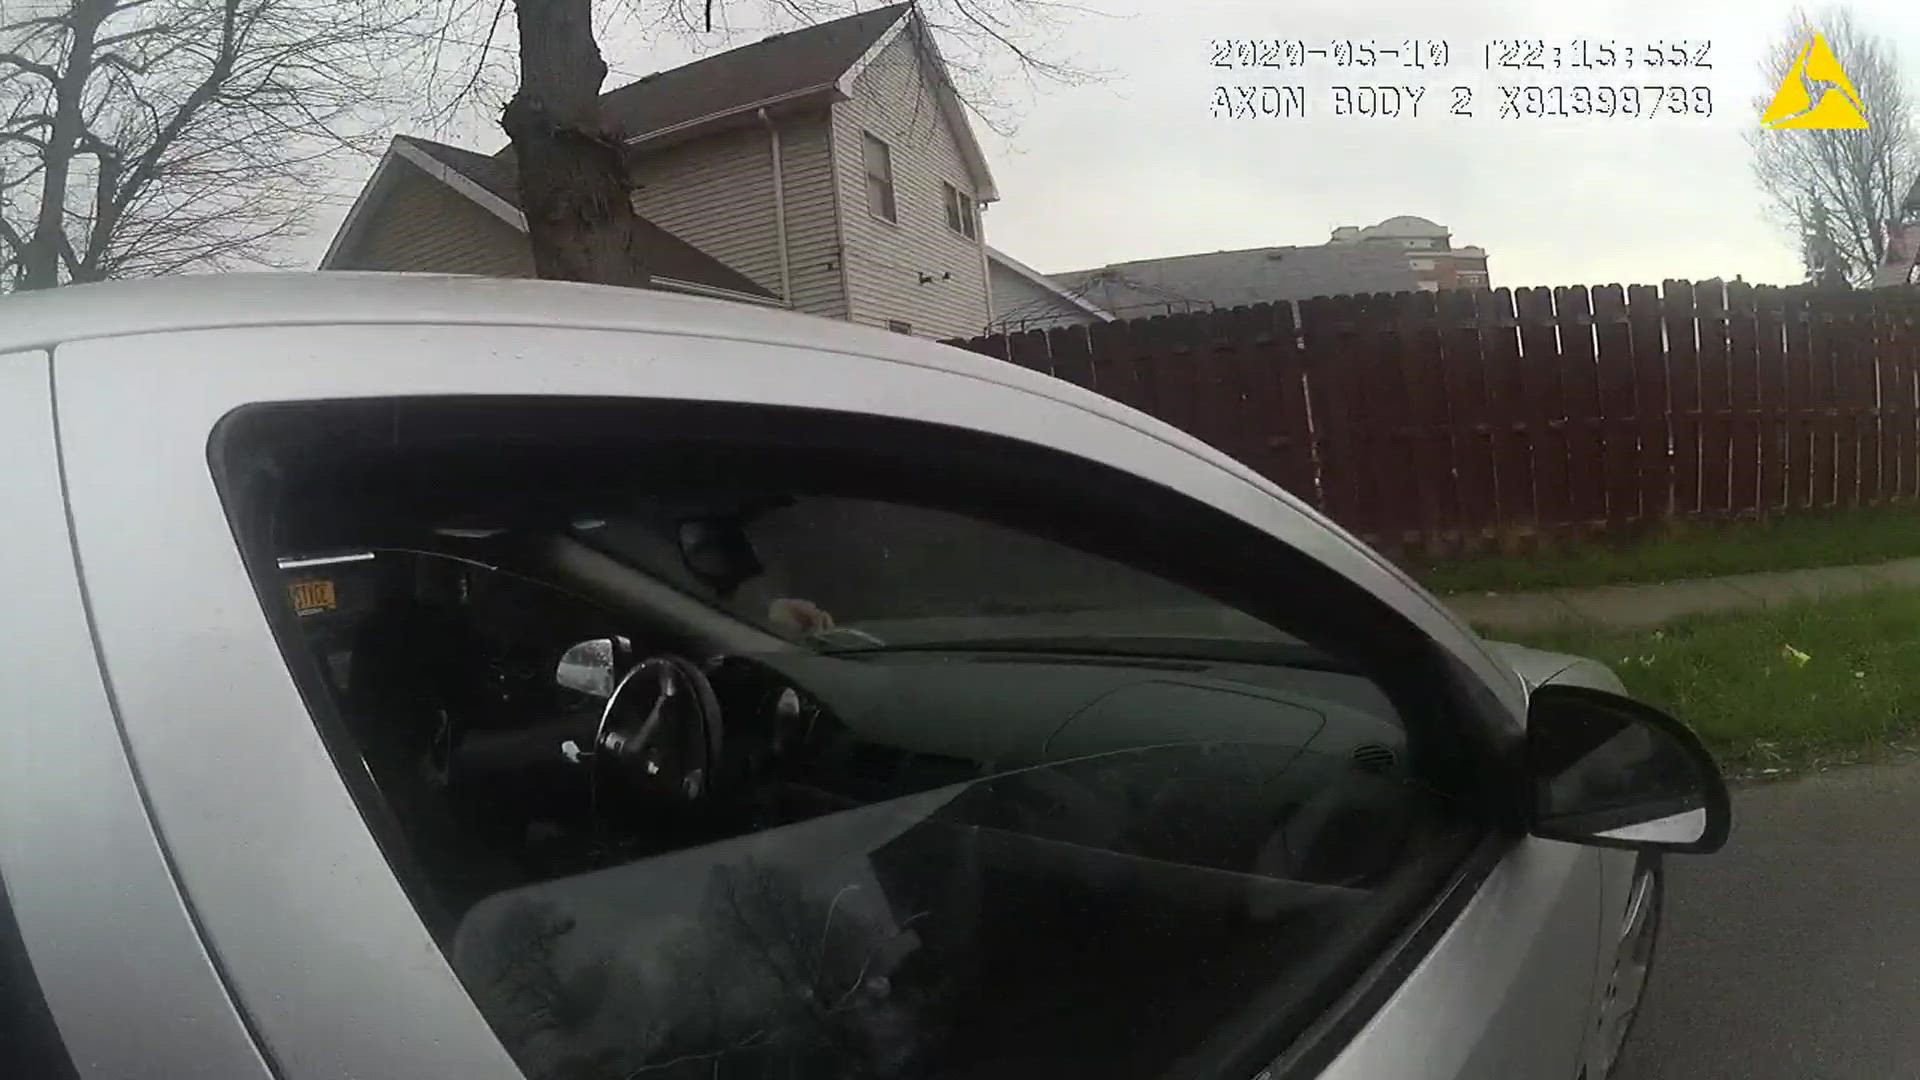 The attorney for Suttles released more Buffalo Police body cam footage of the arrest at a news conference on Friday.